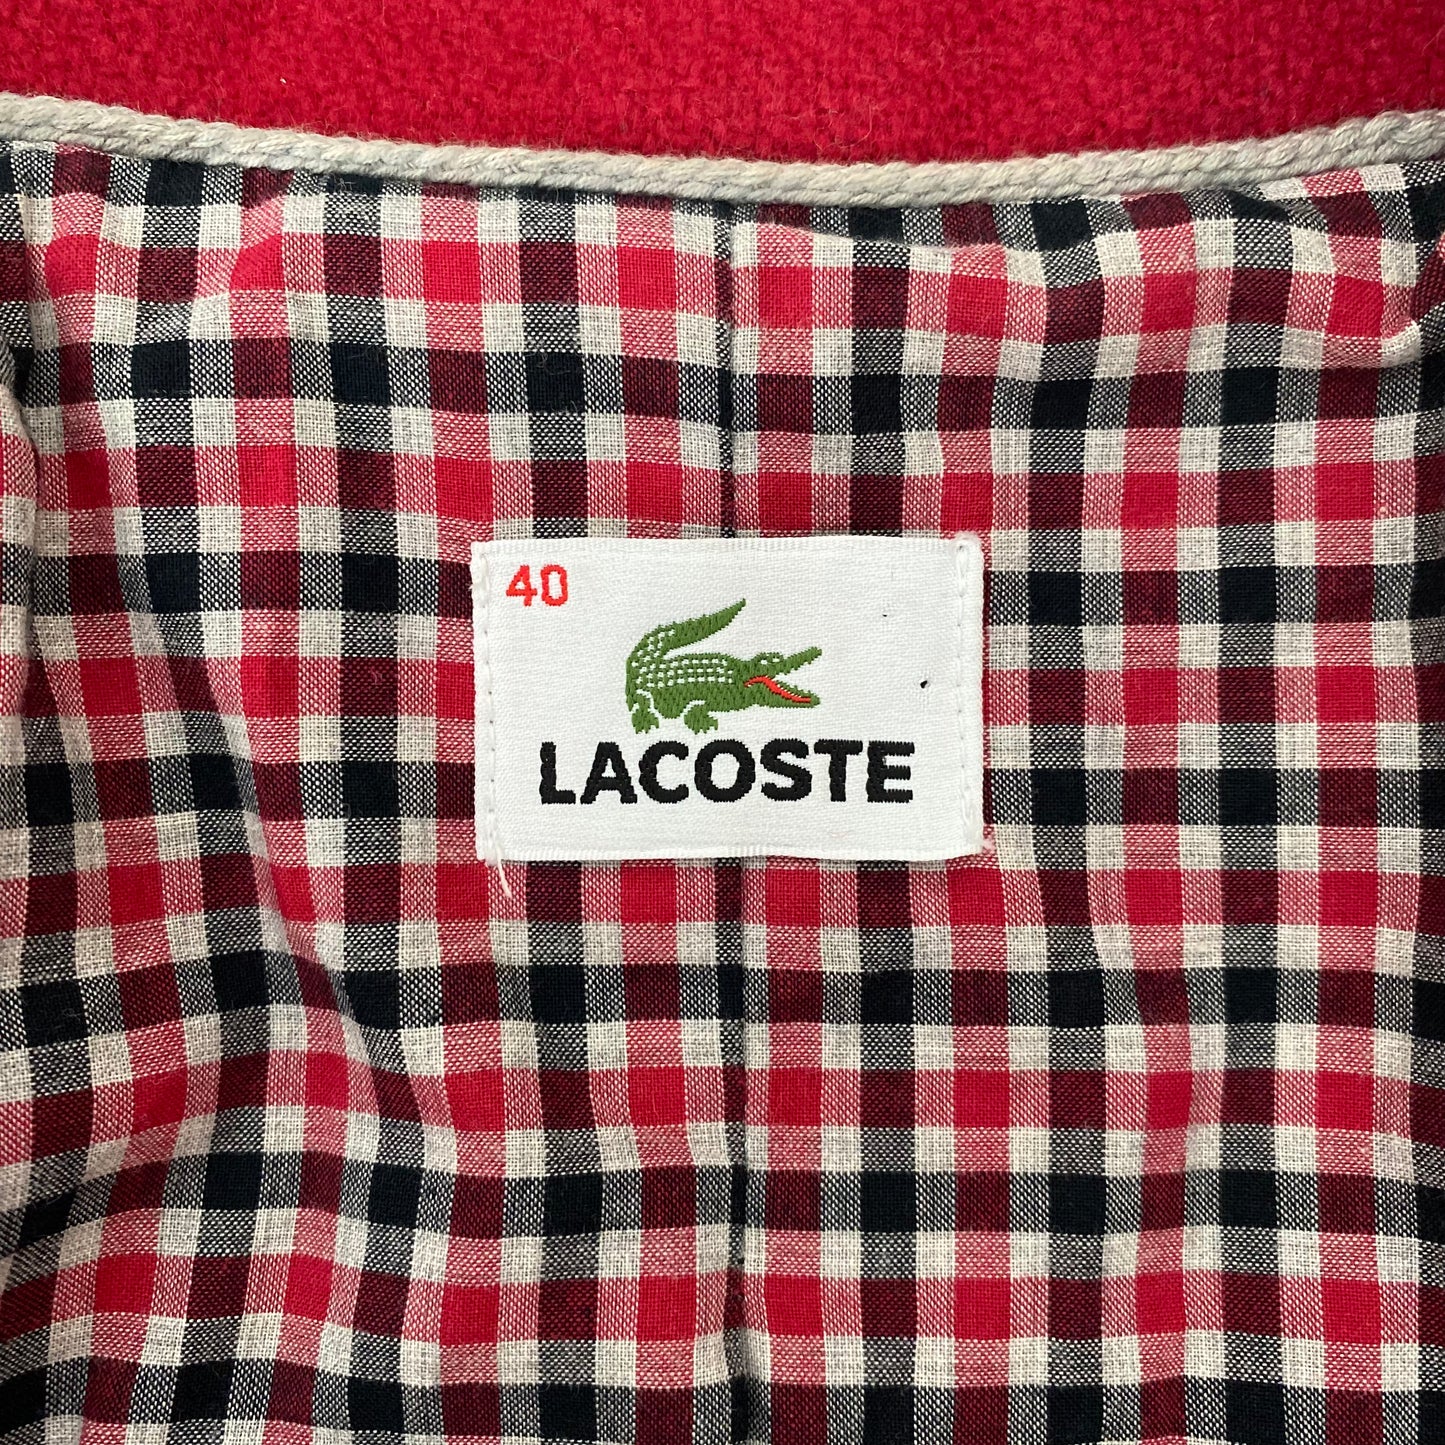 Lacoste Wool Pea Coat Size Small to Medium